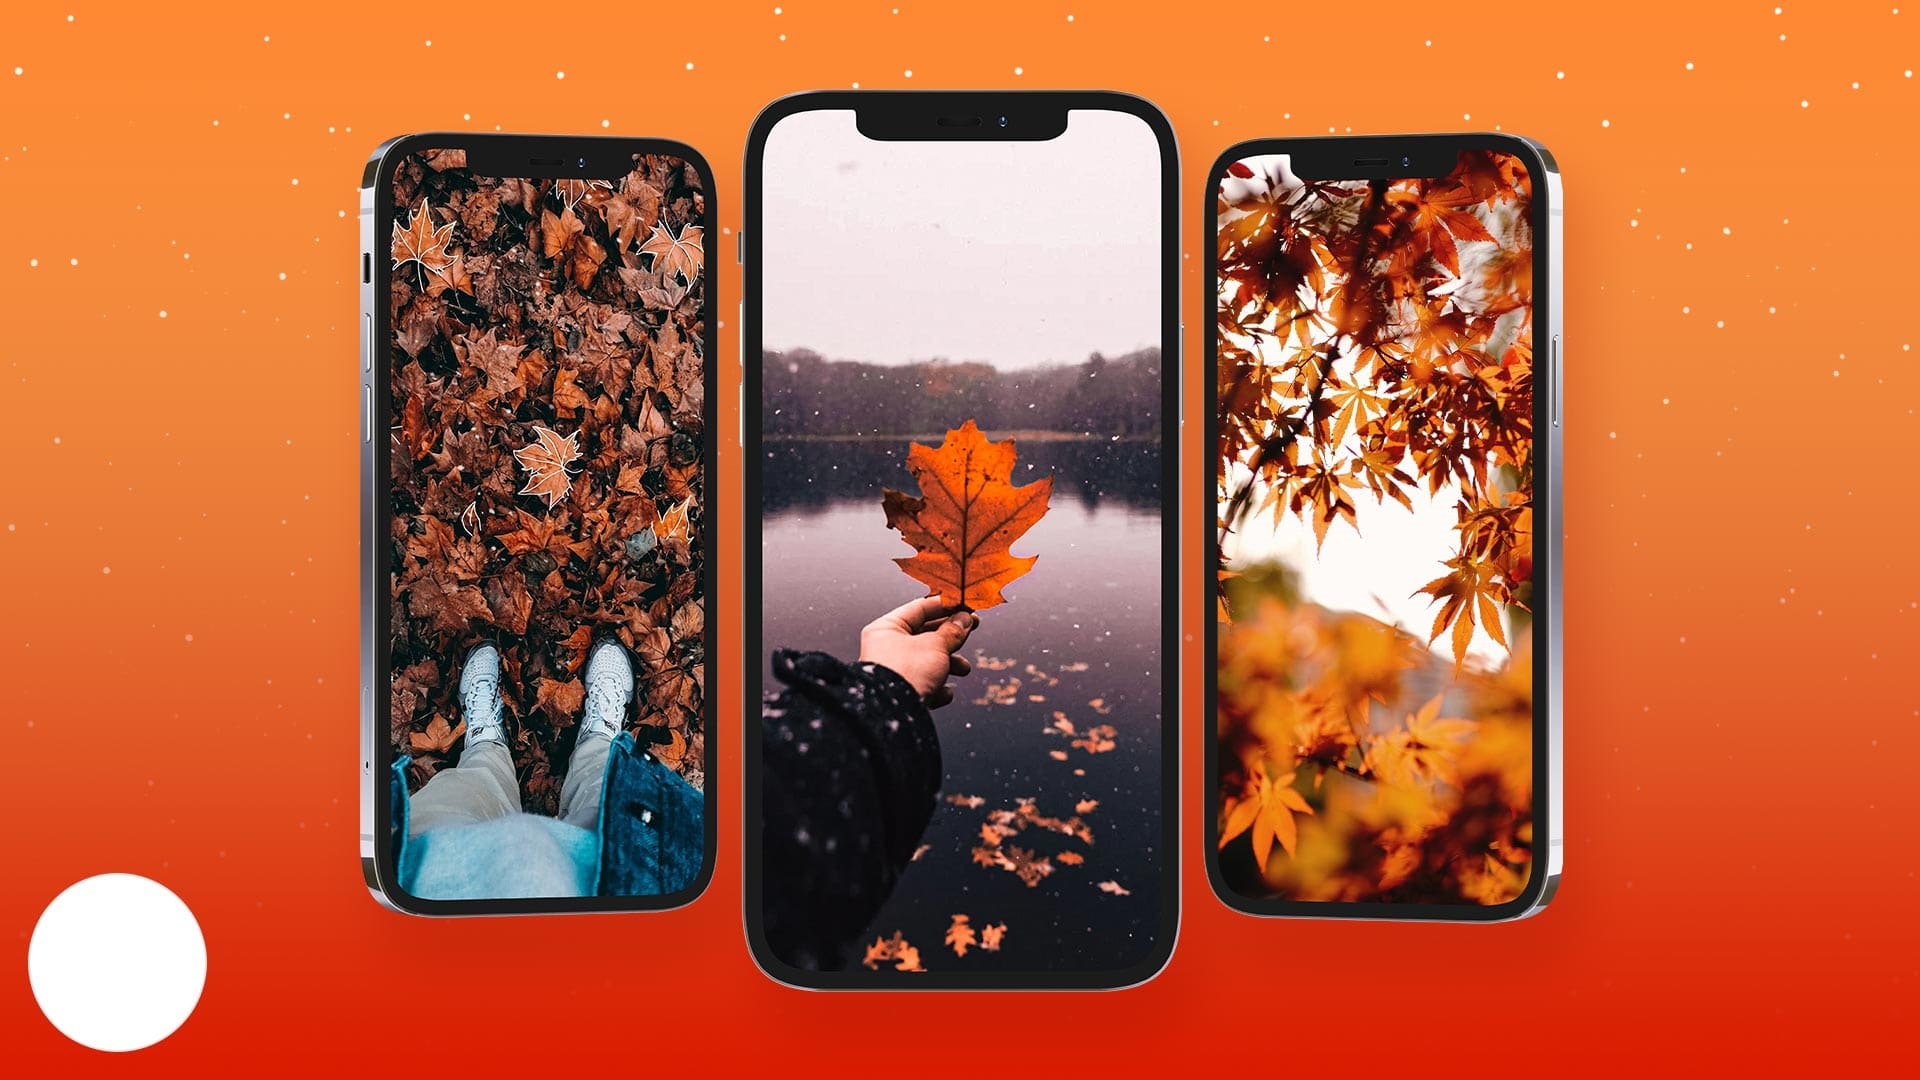 A Beautiful Fall Wallpapers. Download The Free Fall Wallpaper Now! Get Free Nature Wallpapers Here.